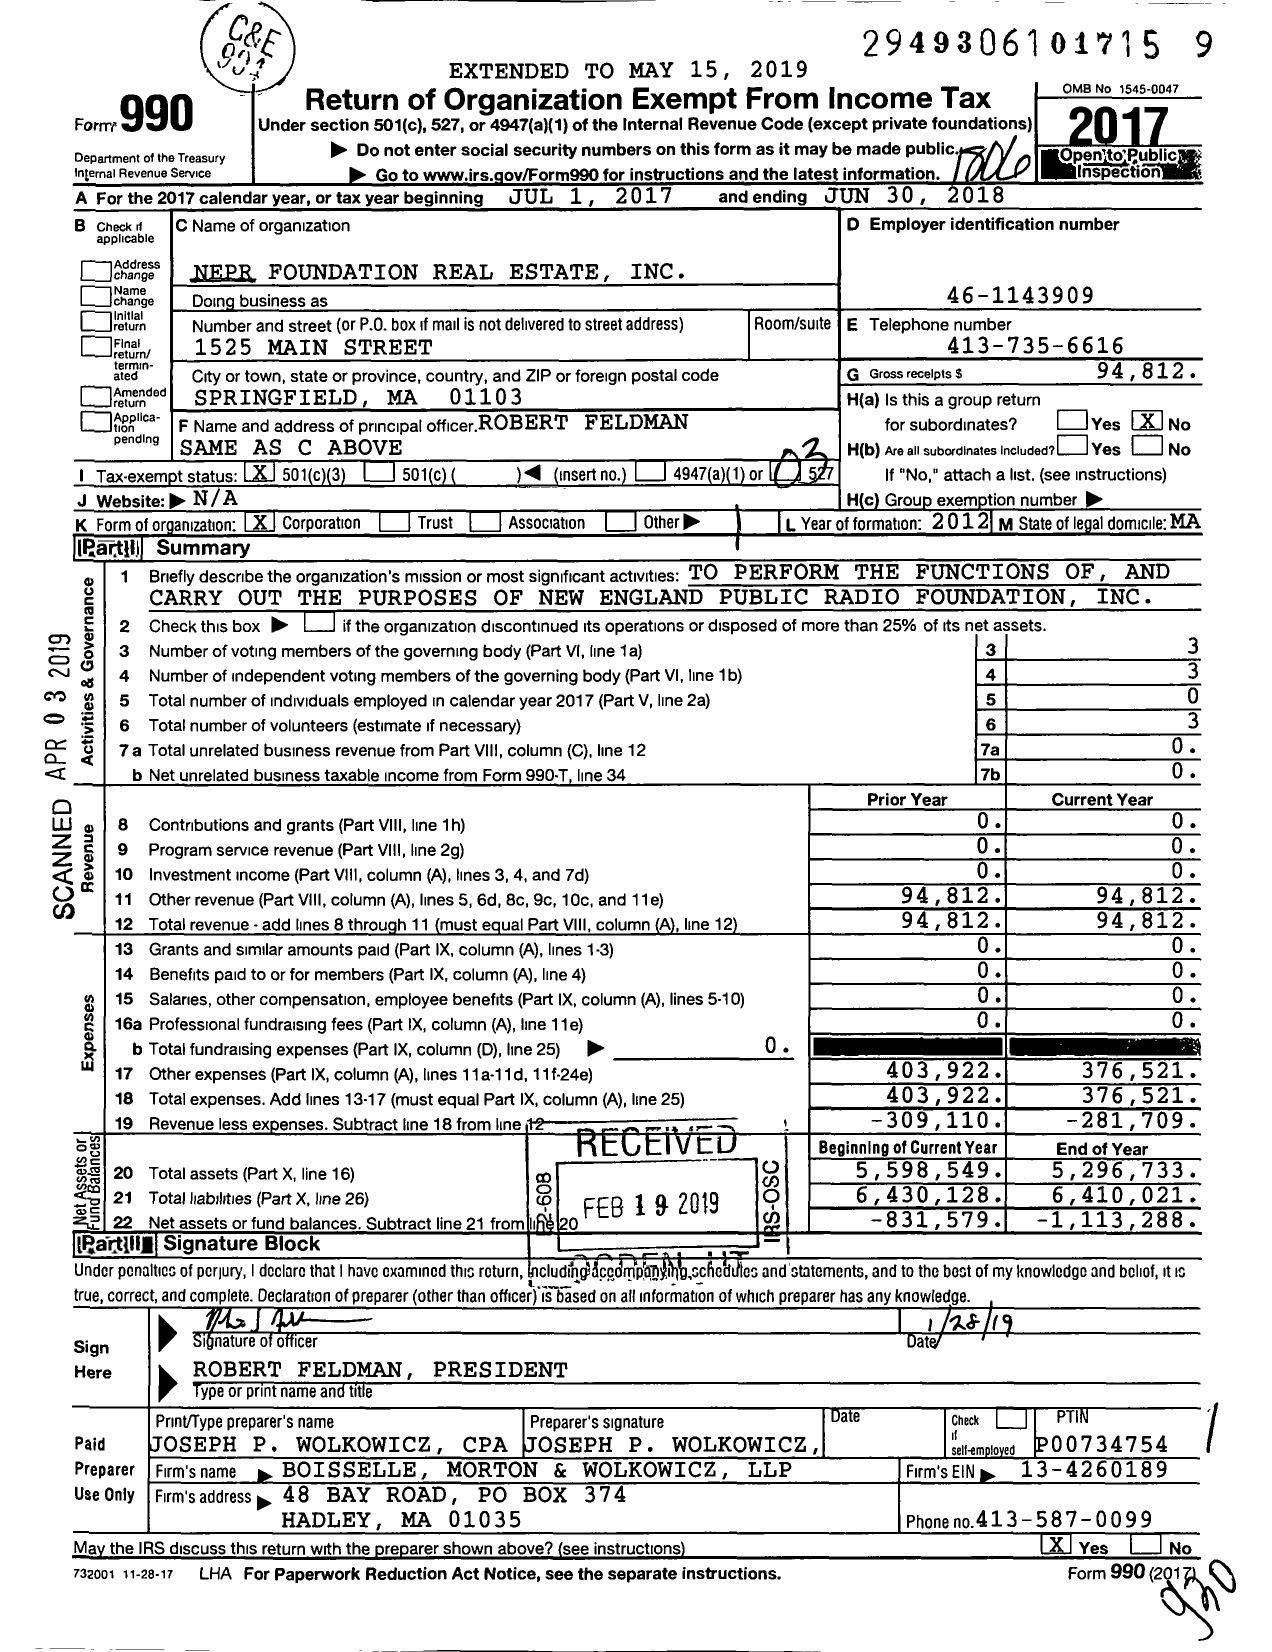 Image of first page of 2017 Form 990 for Nepr Foundation Real Estate